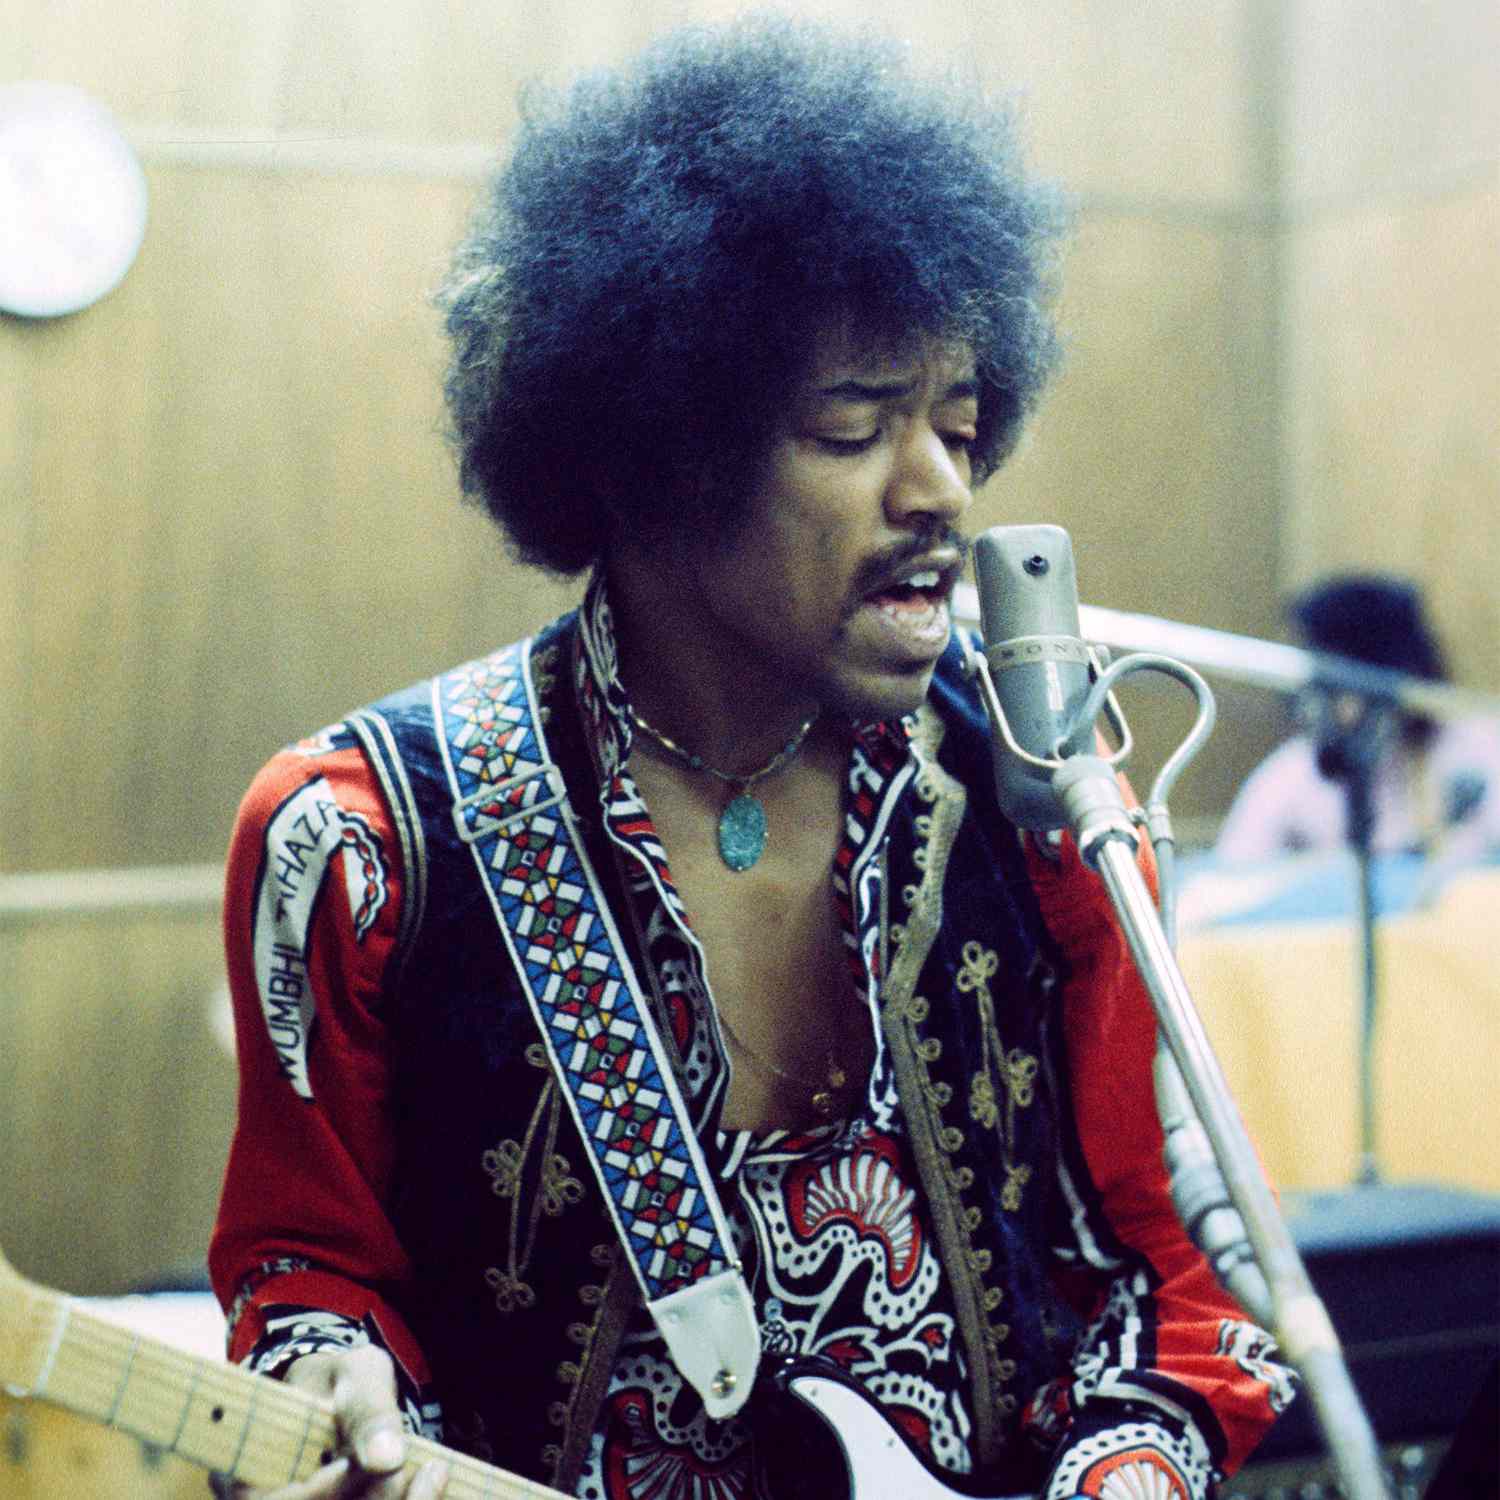 For publicity purposes only on editorial articles surrounding the March 9, 2018 release of Jimi Hendrix: Both Sides Of The Sky.